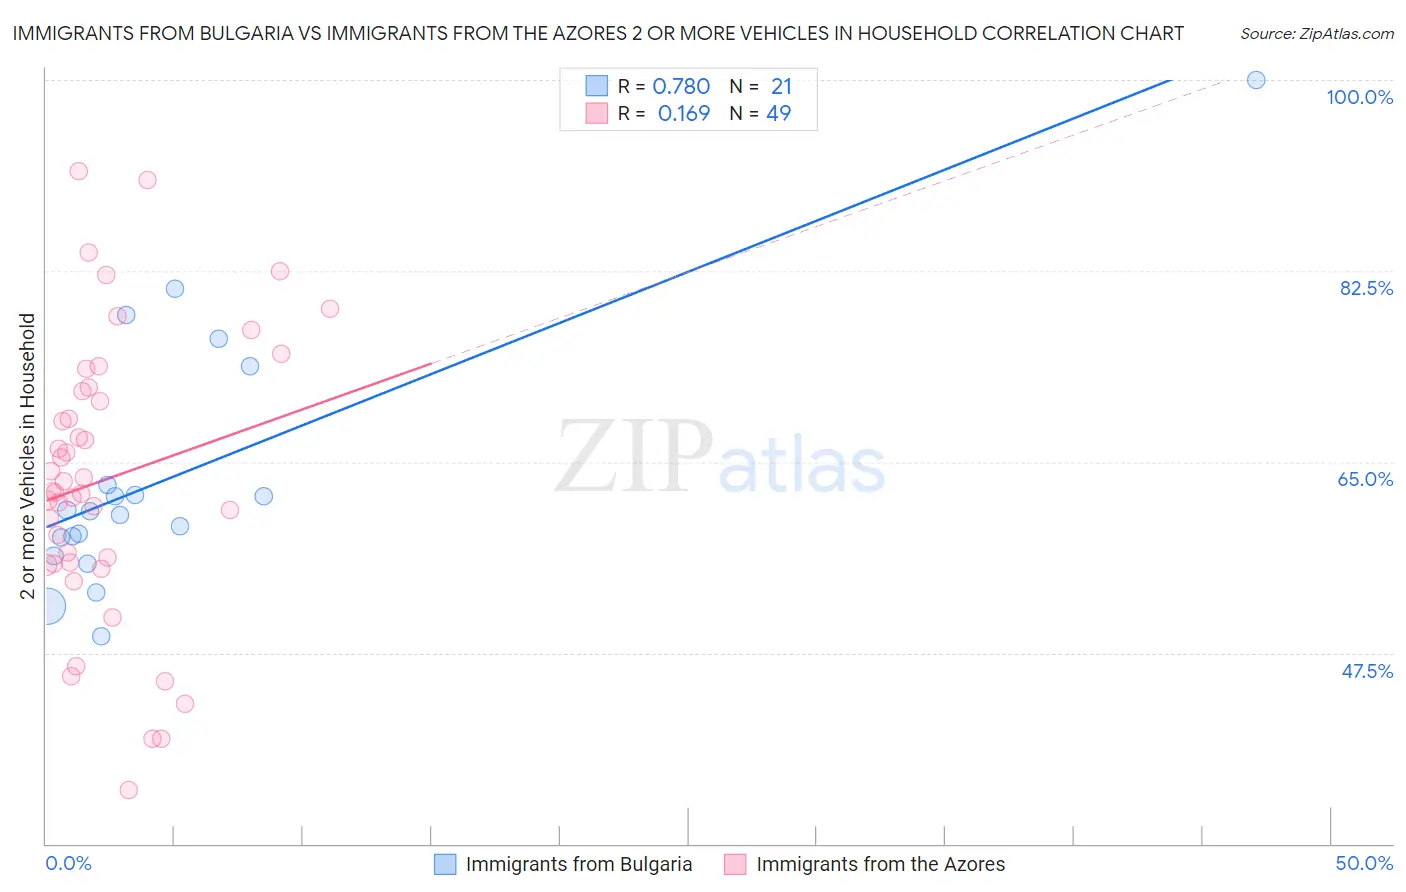 Immigrants from Bulgaria vs Immigrants from the Azores 2 or more Vehicles in Household